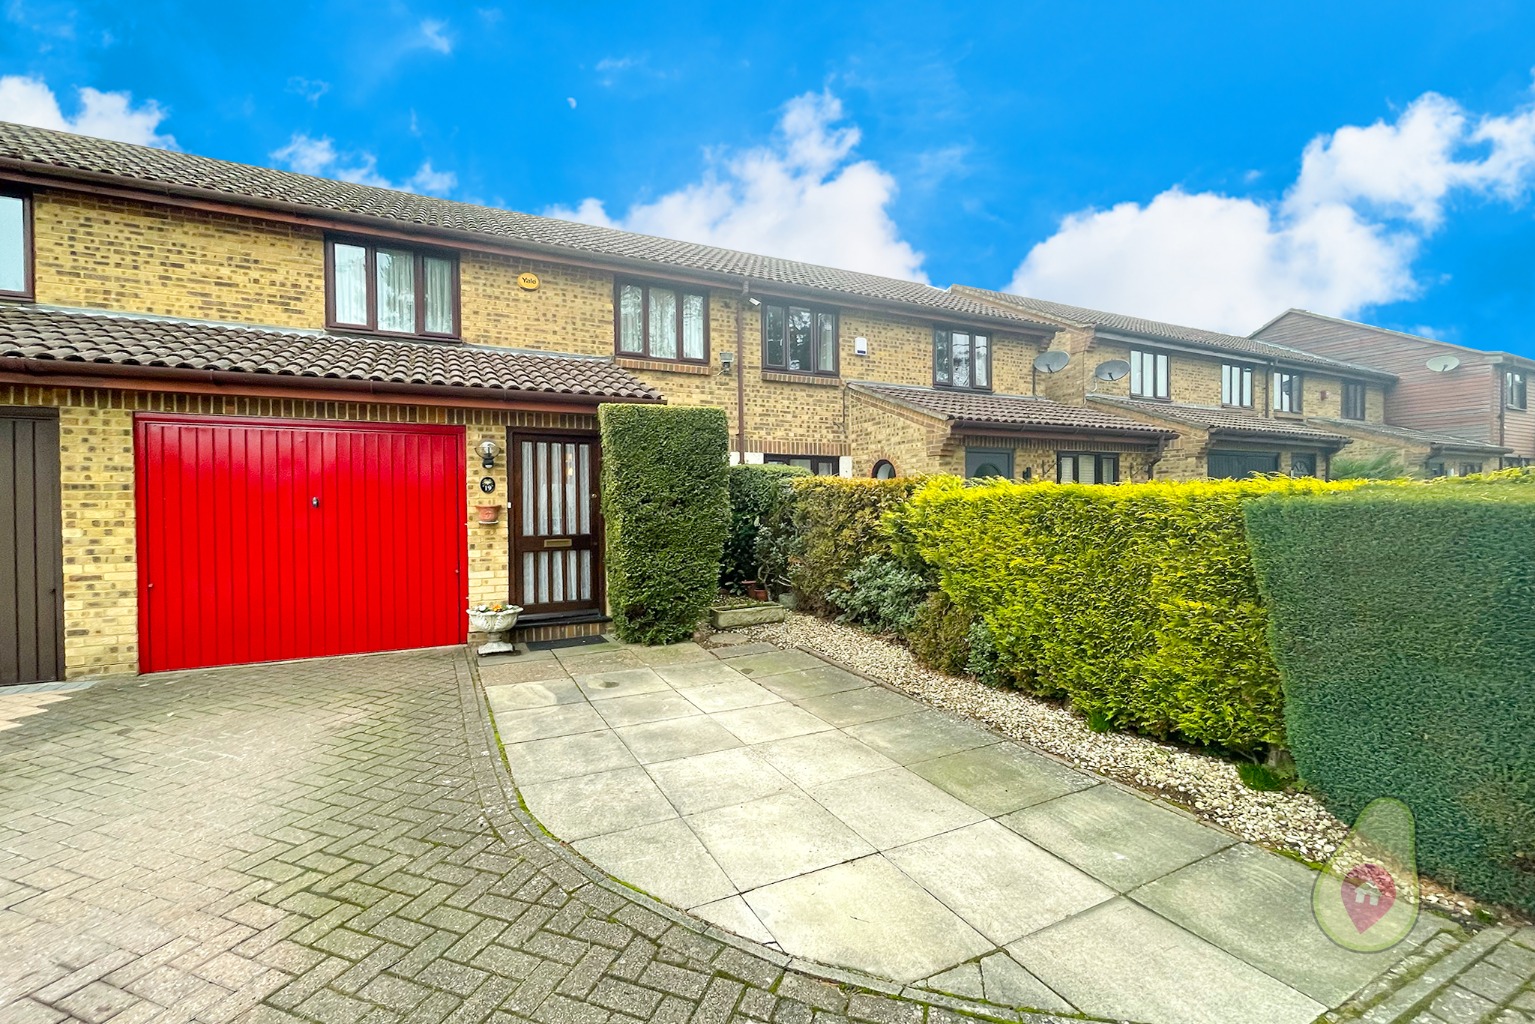 In a beautifully quiet location, this 3 bedroom house has been a much loved home for the last 29 years - offered to the market with no onward chain and presenting the ideal opportunity for someone to make this their home for many years to come.